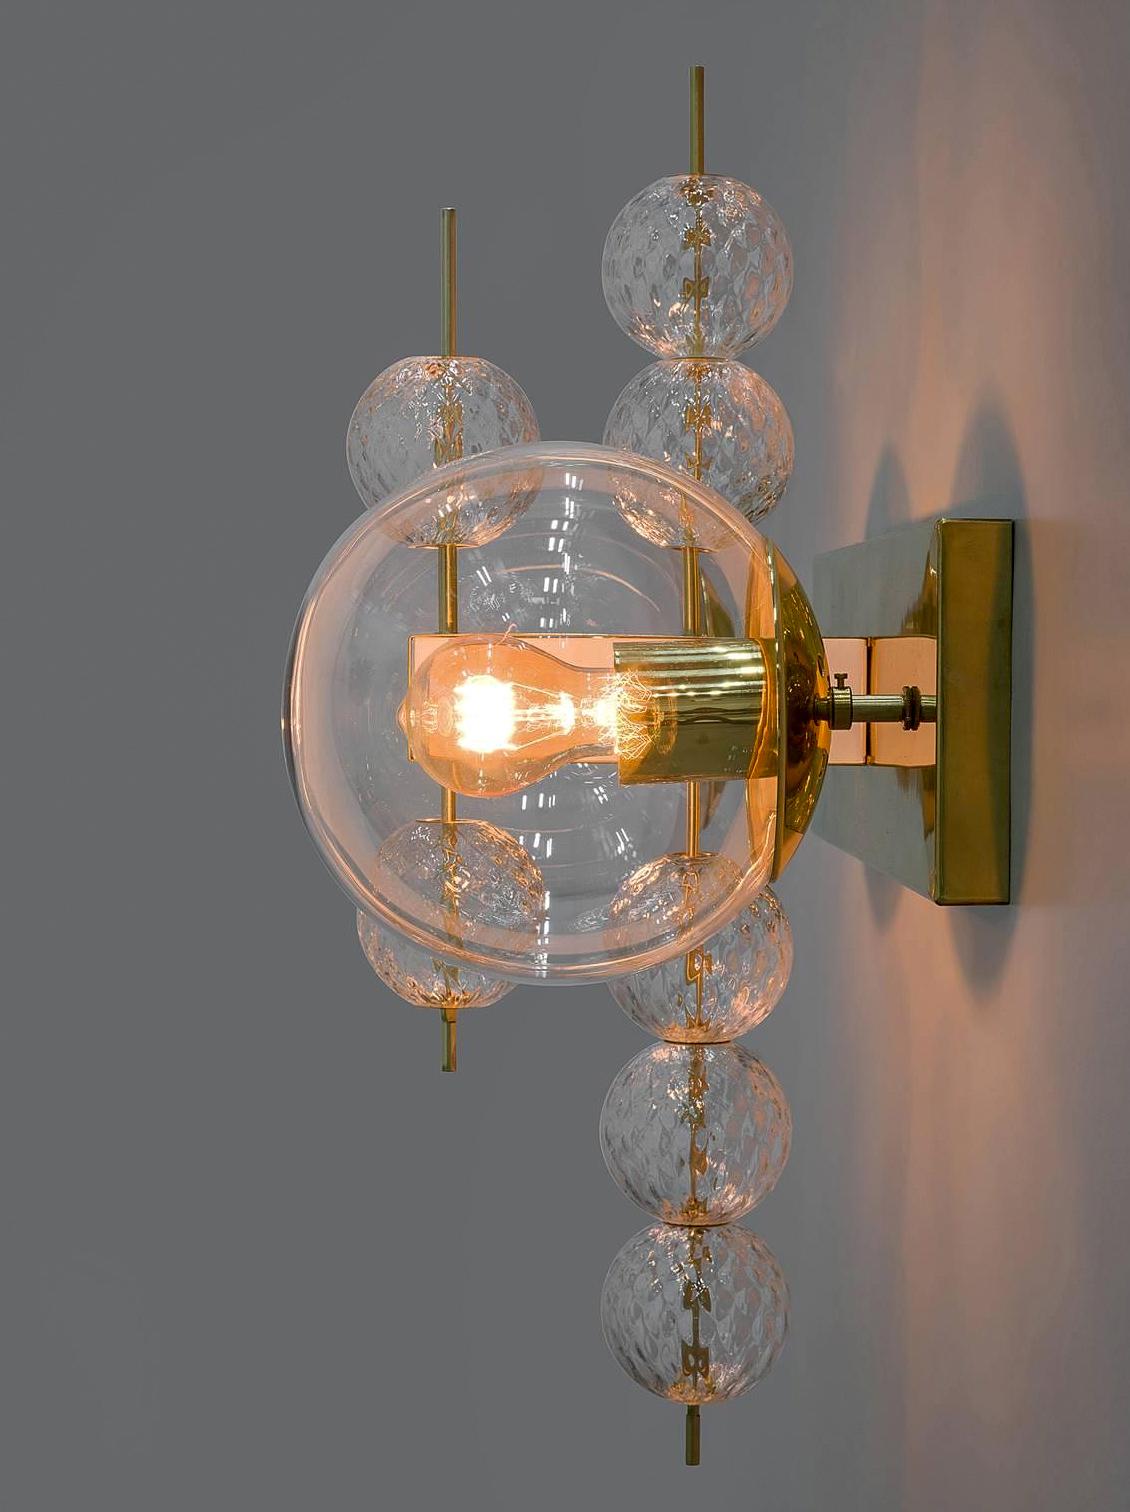 Set Midcentury Hotel Wall Chandeliers with Brass Fixture, European, 1970s For Sale 1